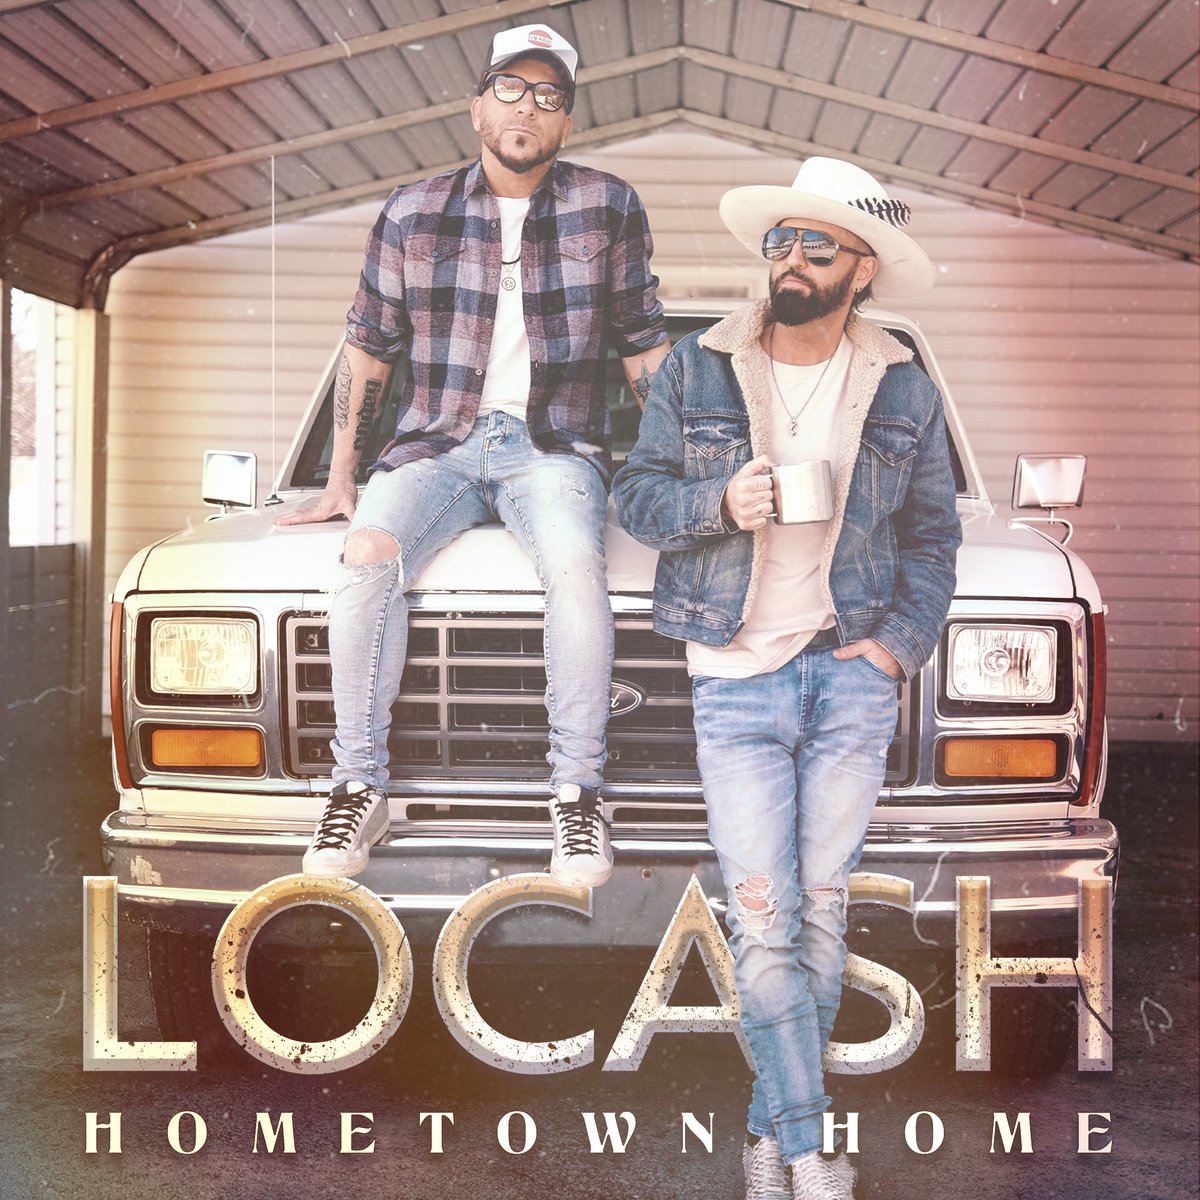 Hey yall! We’re stoked to announce our new single “Hometown Home” is comin out April 19th! We’re gunna be selecting 1 lucky PRE-SAVER to jump on a Zoom with us to show our appreciation. All you gotta do is PRE-SAVE via the link in bio & you’ll be entered! ⚡️